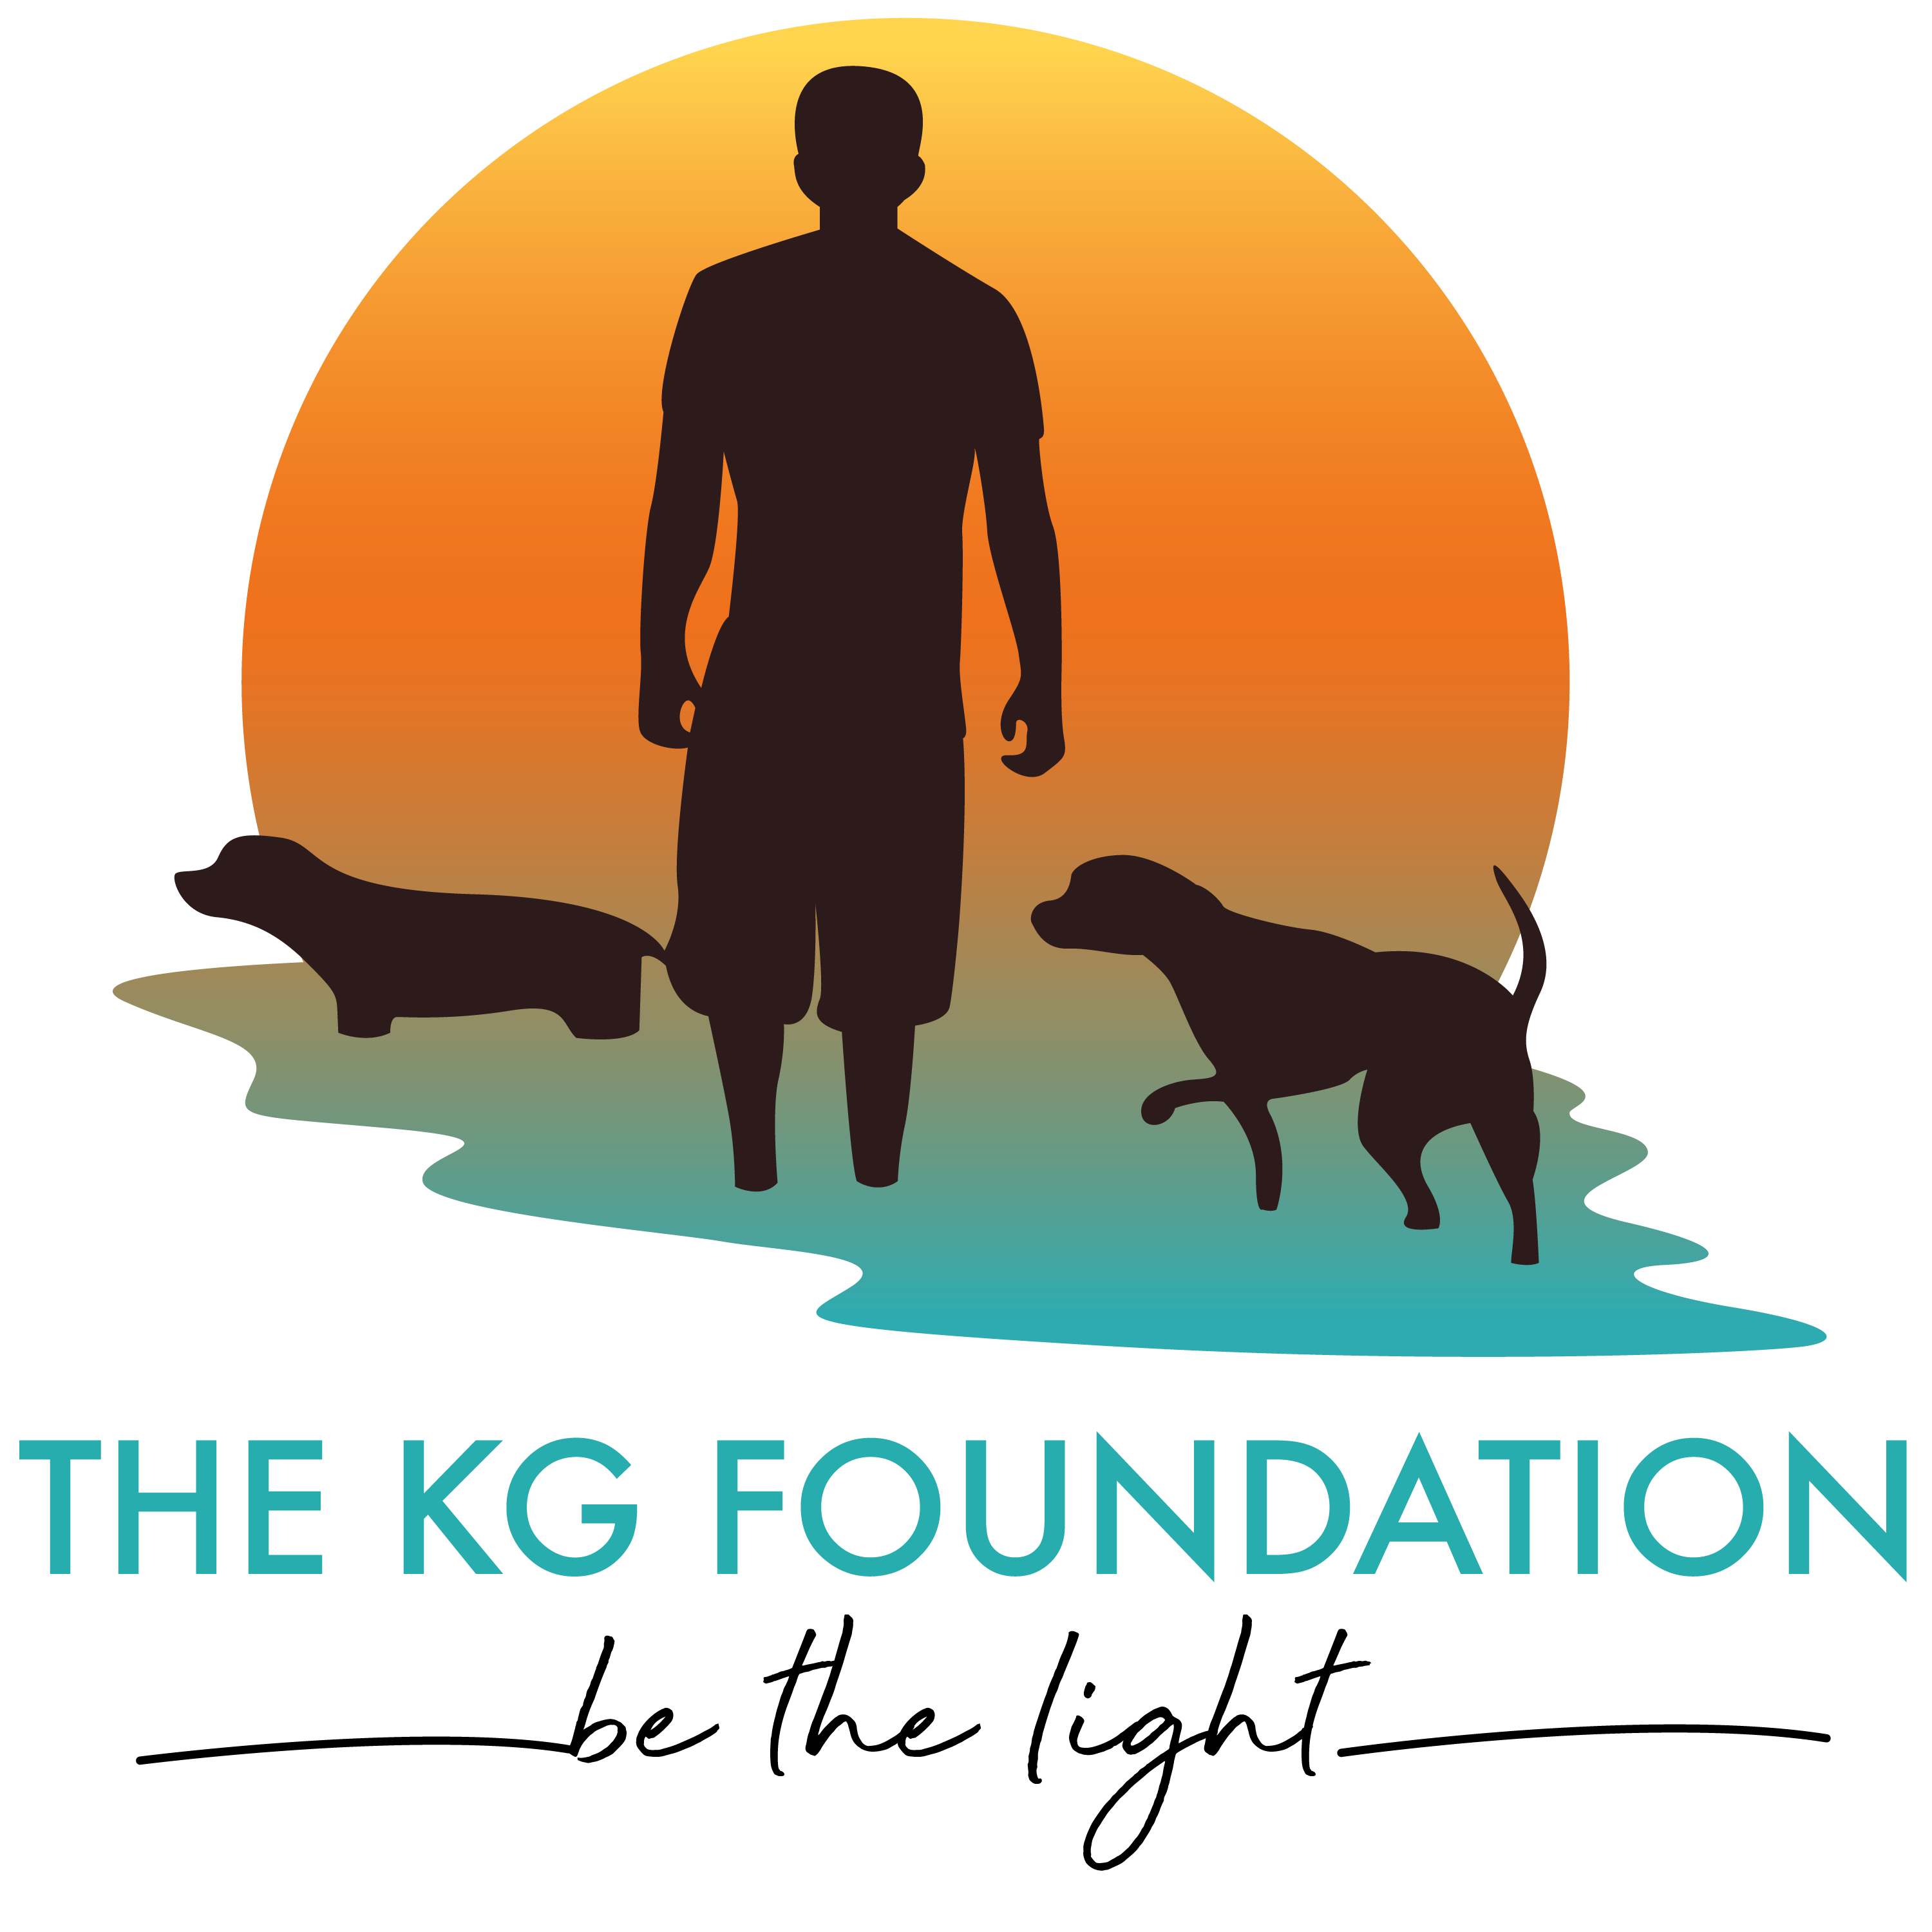 The KG Foundation